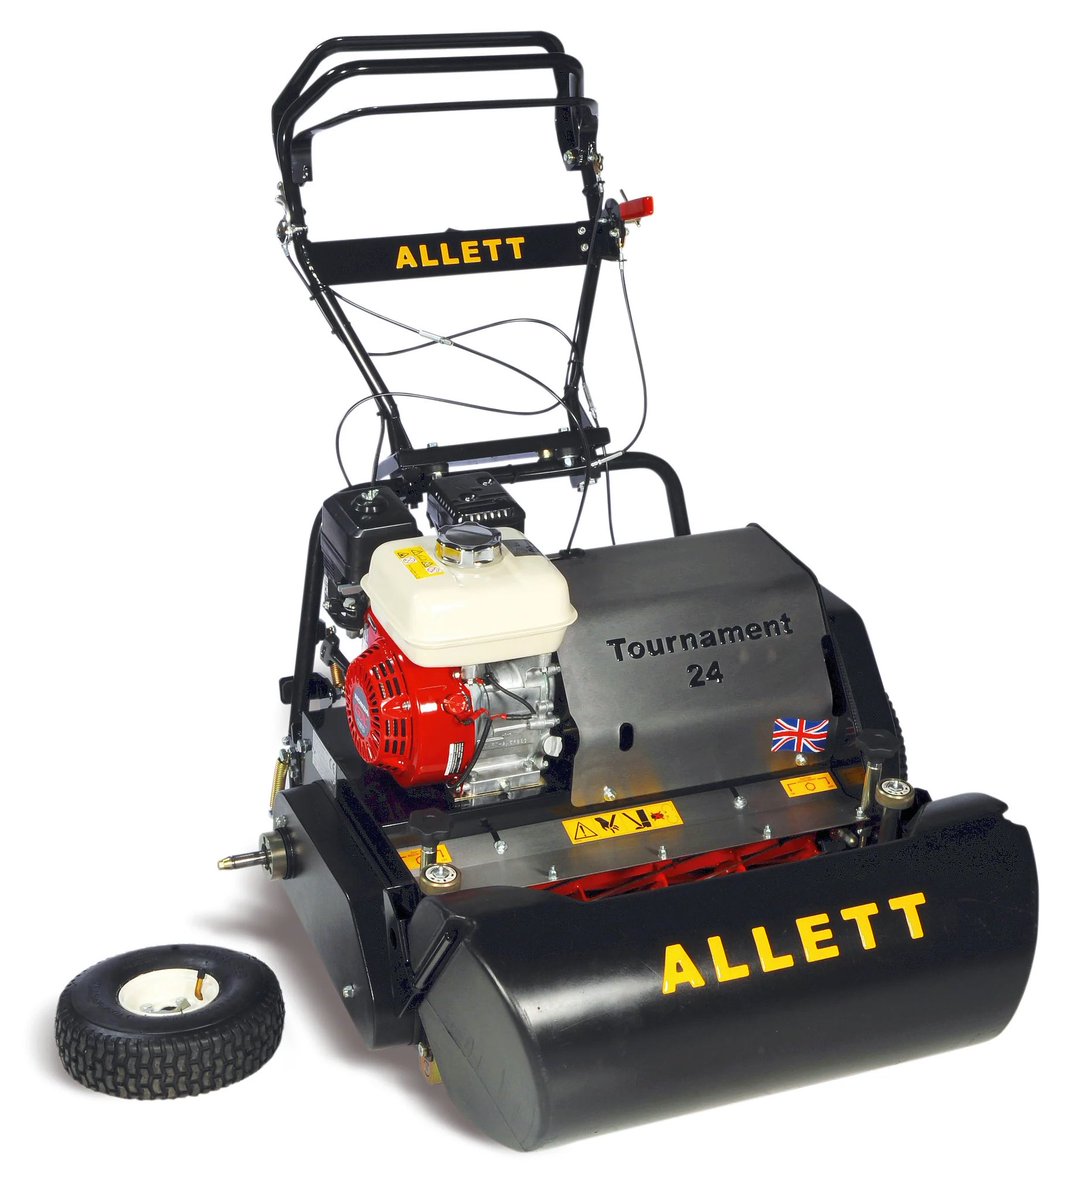 Use our wheel kit to move your mower across the club car park